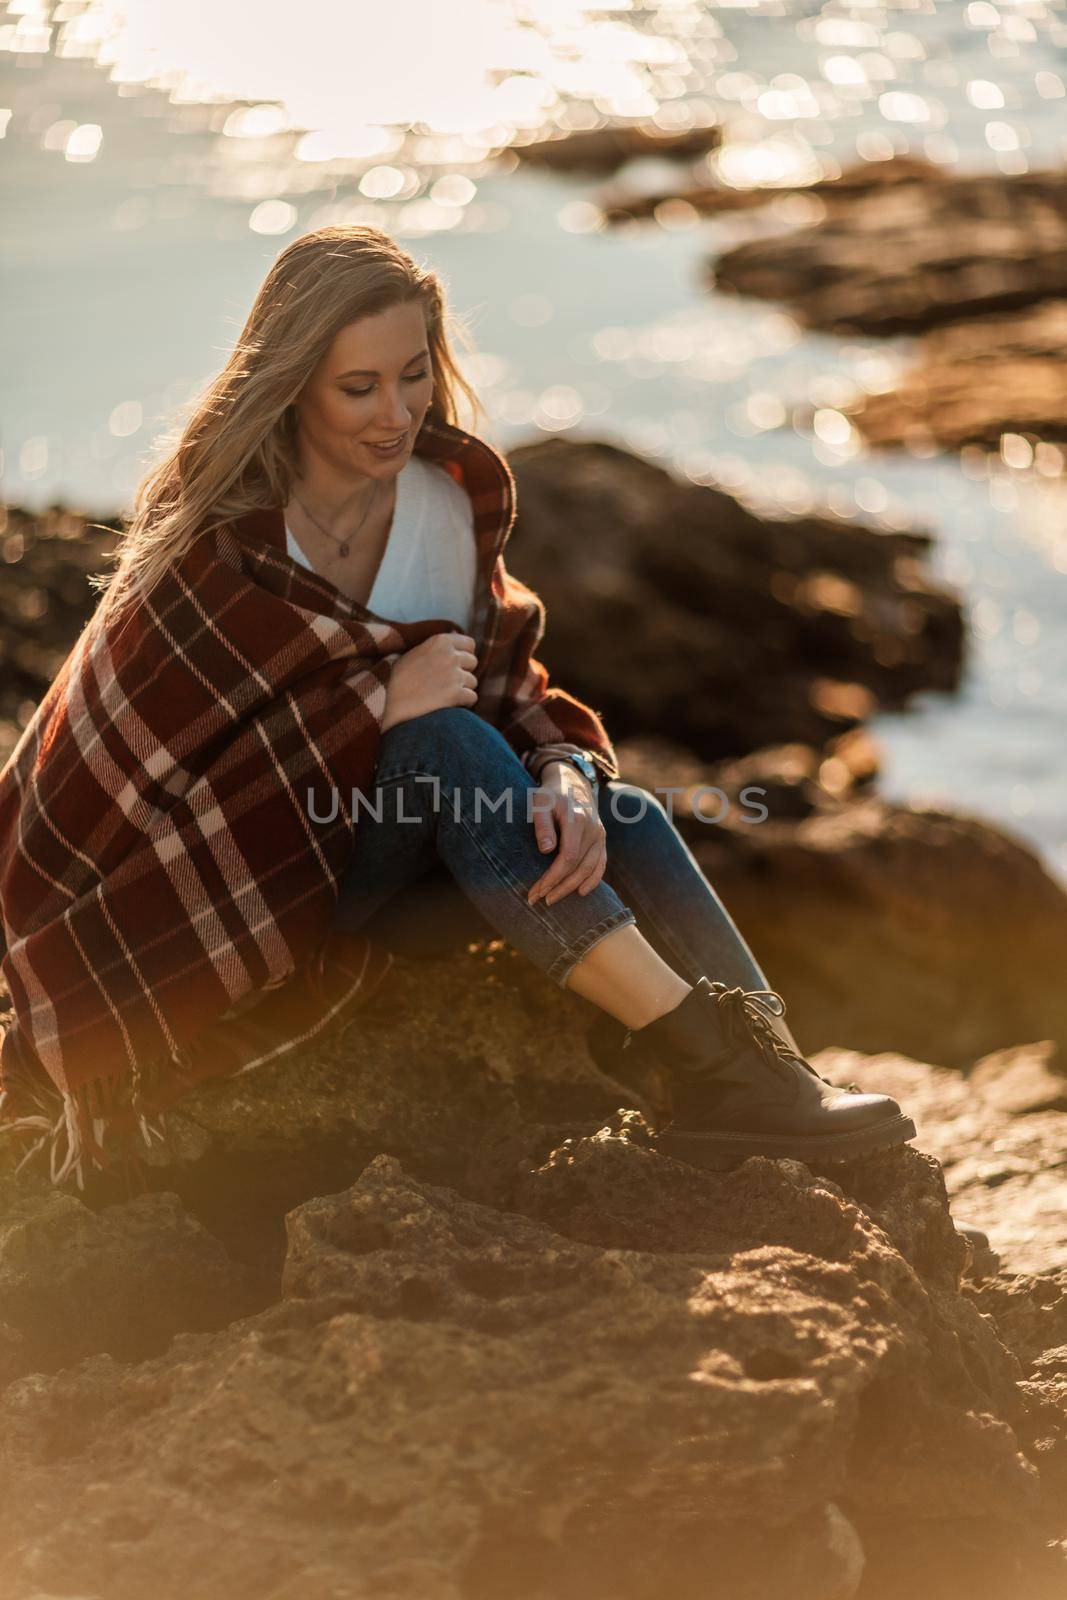 Attractive blonde Caucasian woman enjoying time on the beach at sunset, sitting in a blanket and looking to the side, with the sunset sky and sea in the background. Beach vacation